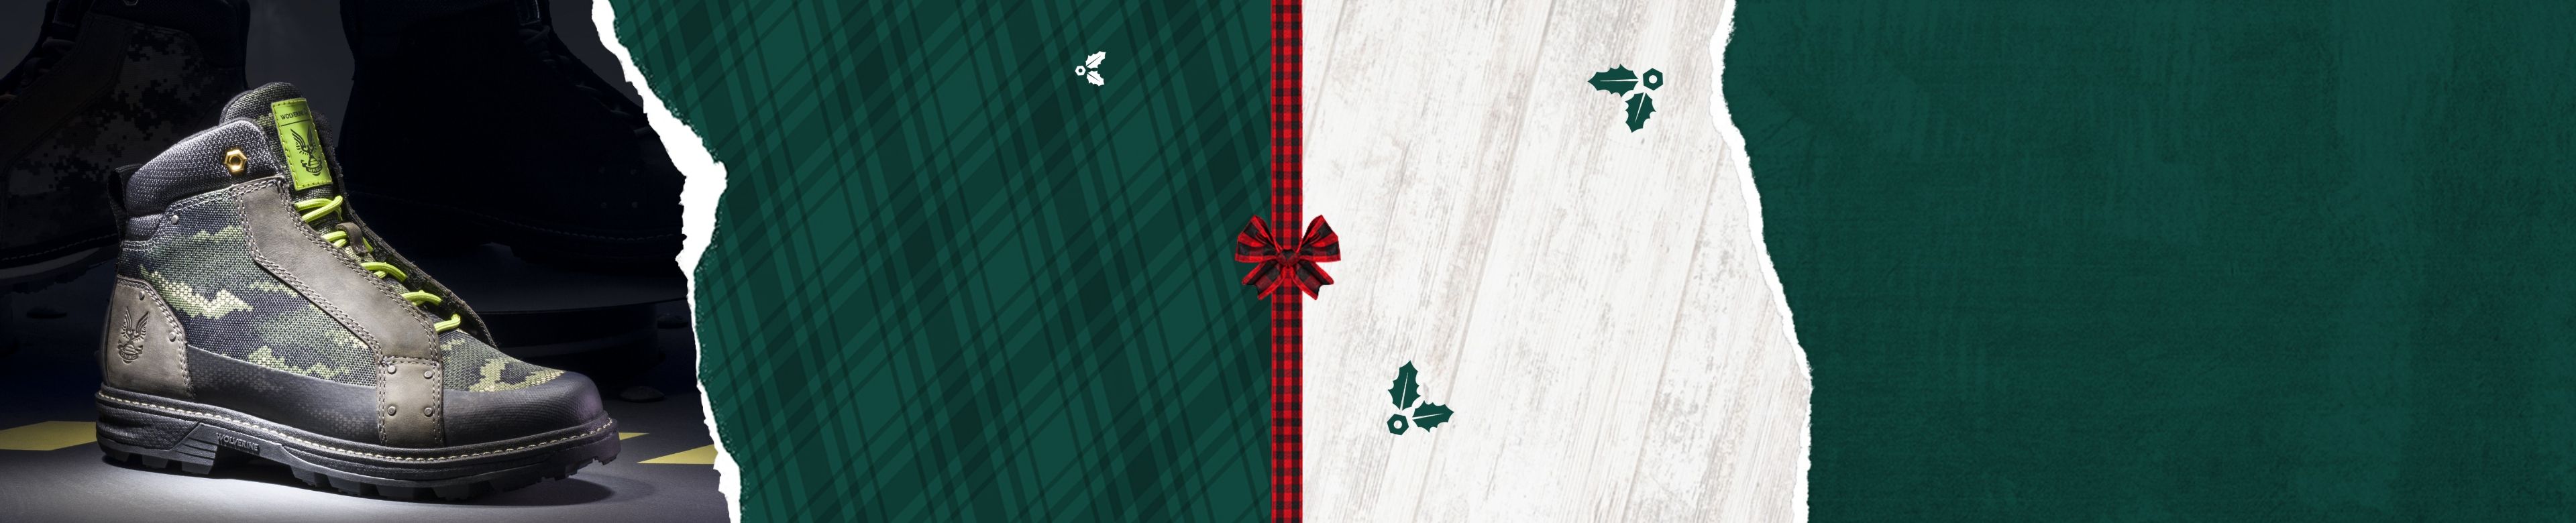 a green and red gift card with a red bow